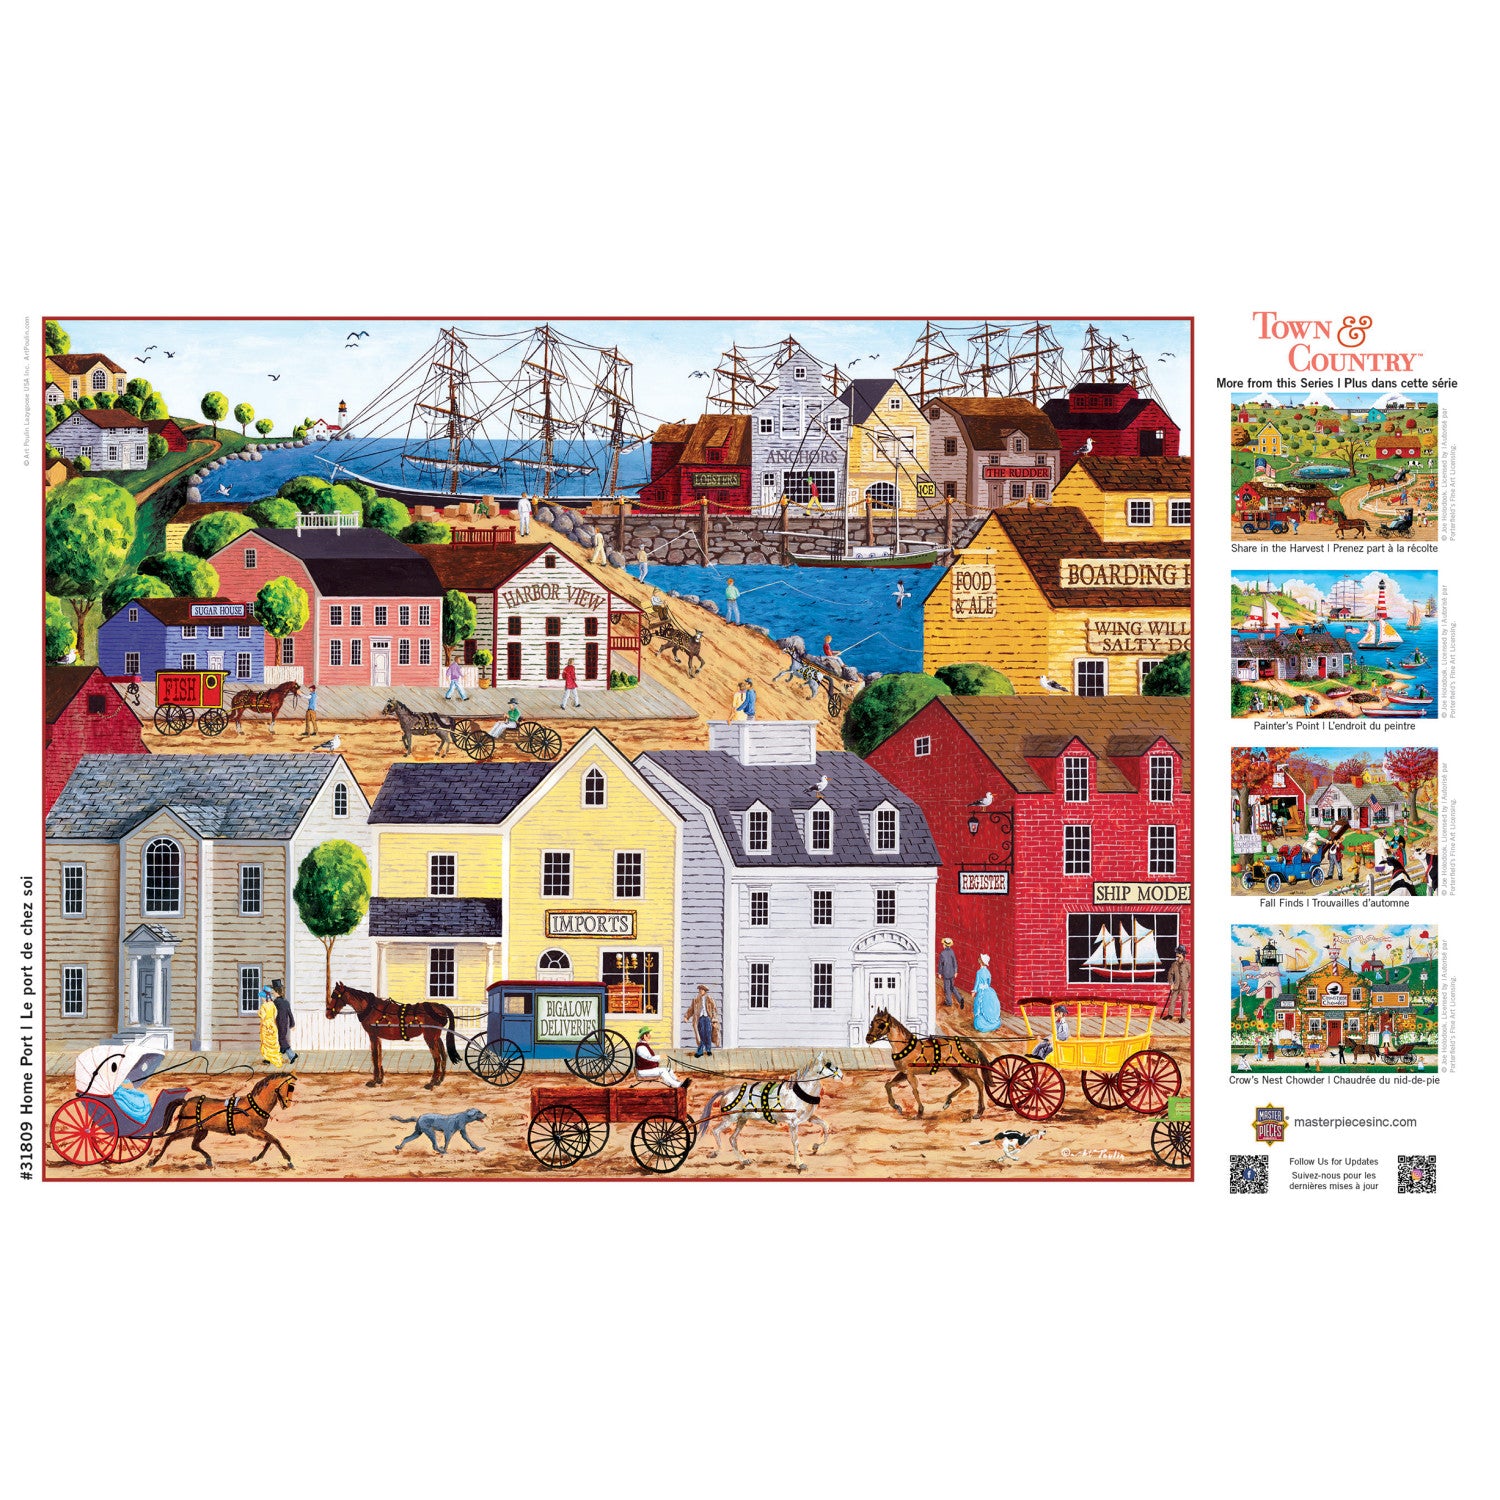 Town & Country - Home Port 300 Piece EZ Grip Jigsaw Puzzle